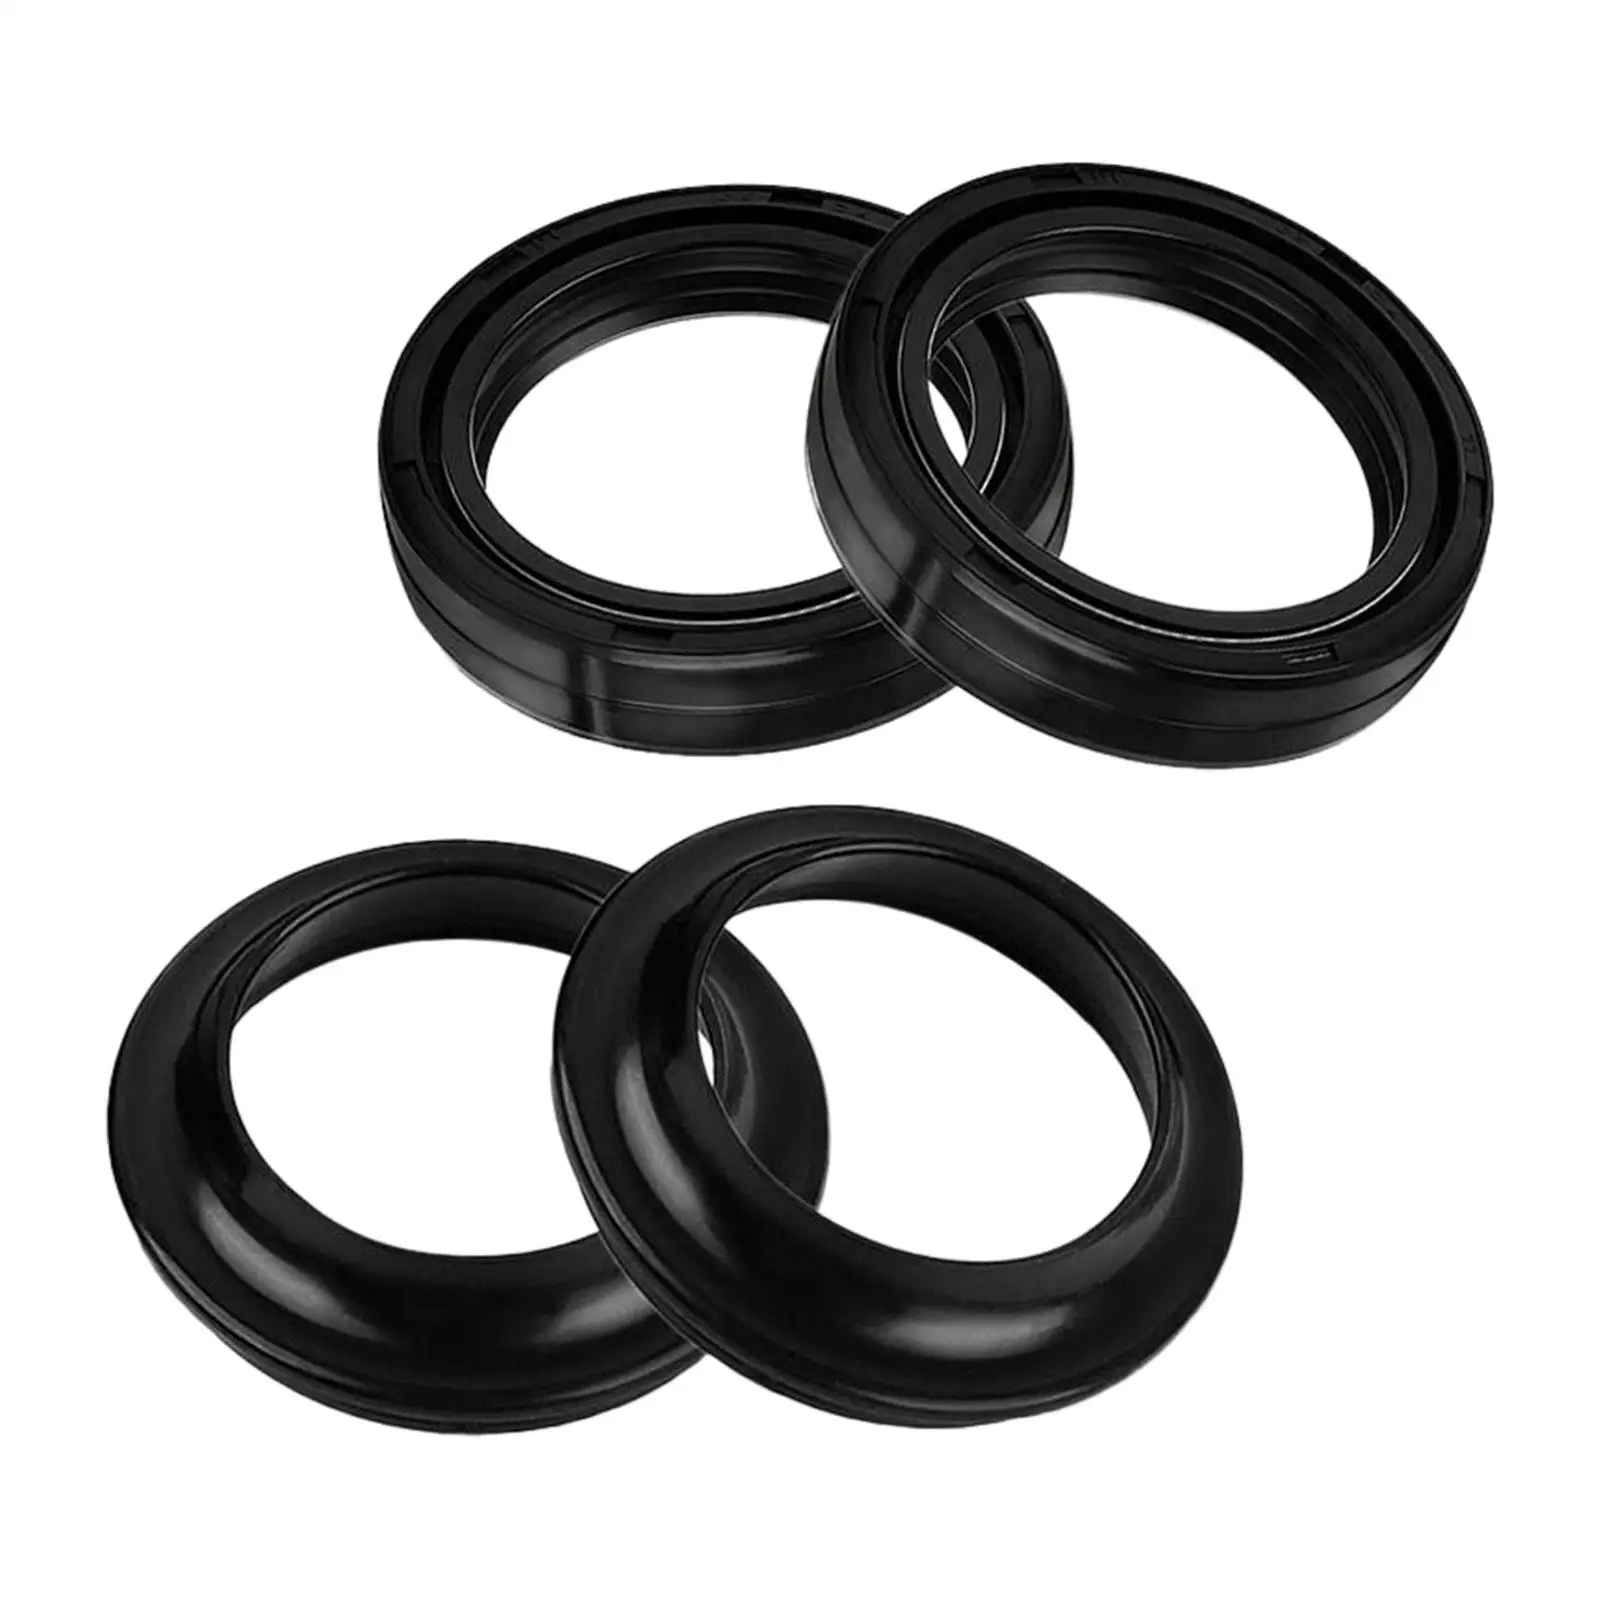 4 Pieces 39x52x11mm Rubber Front Fork Oil Seal & Dust Cover Oil Resistance for